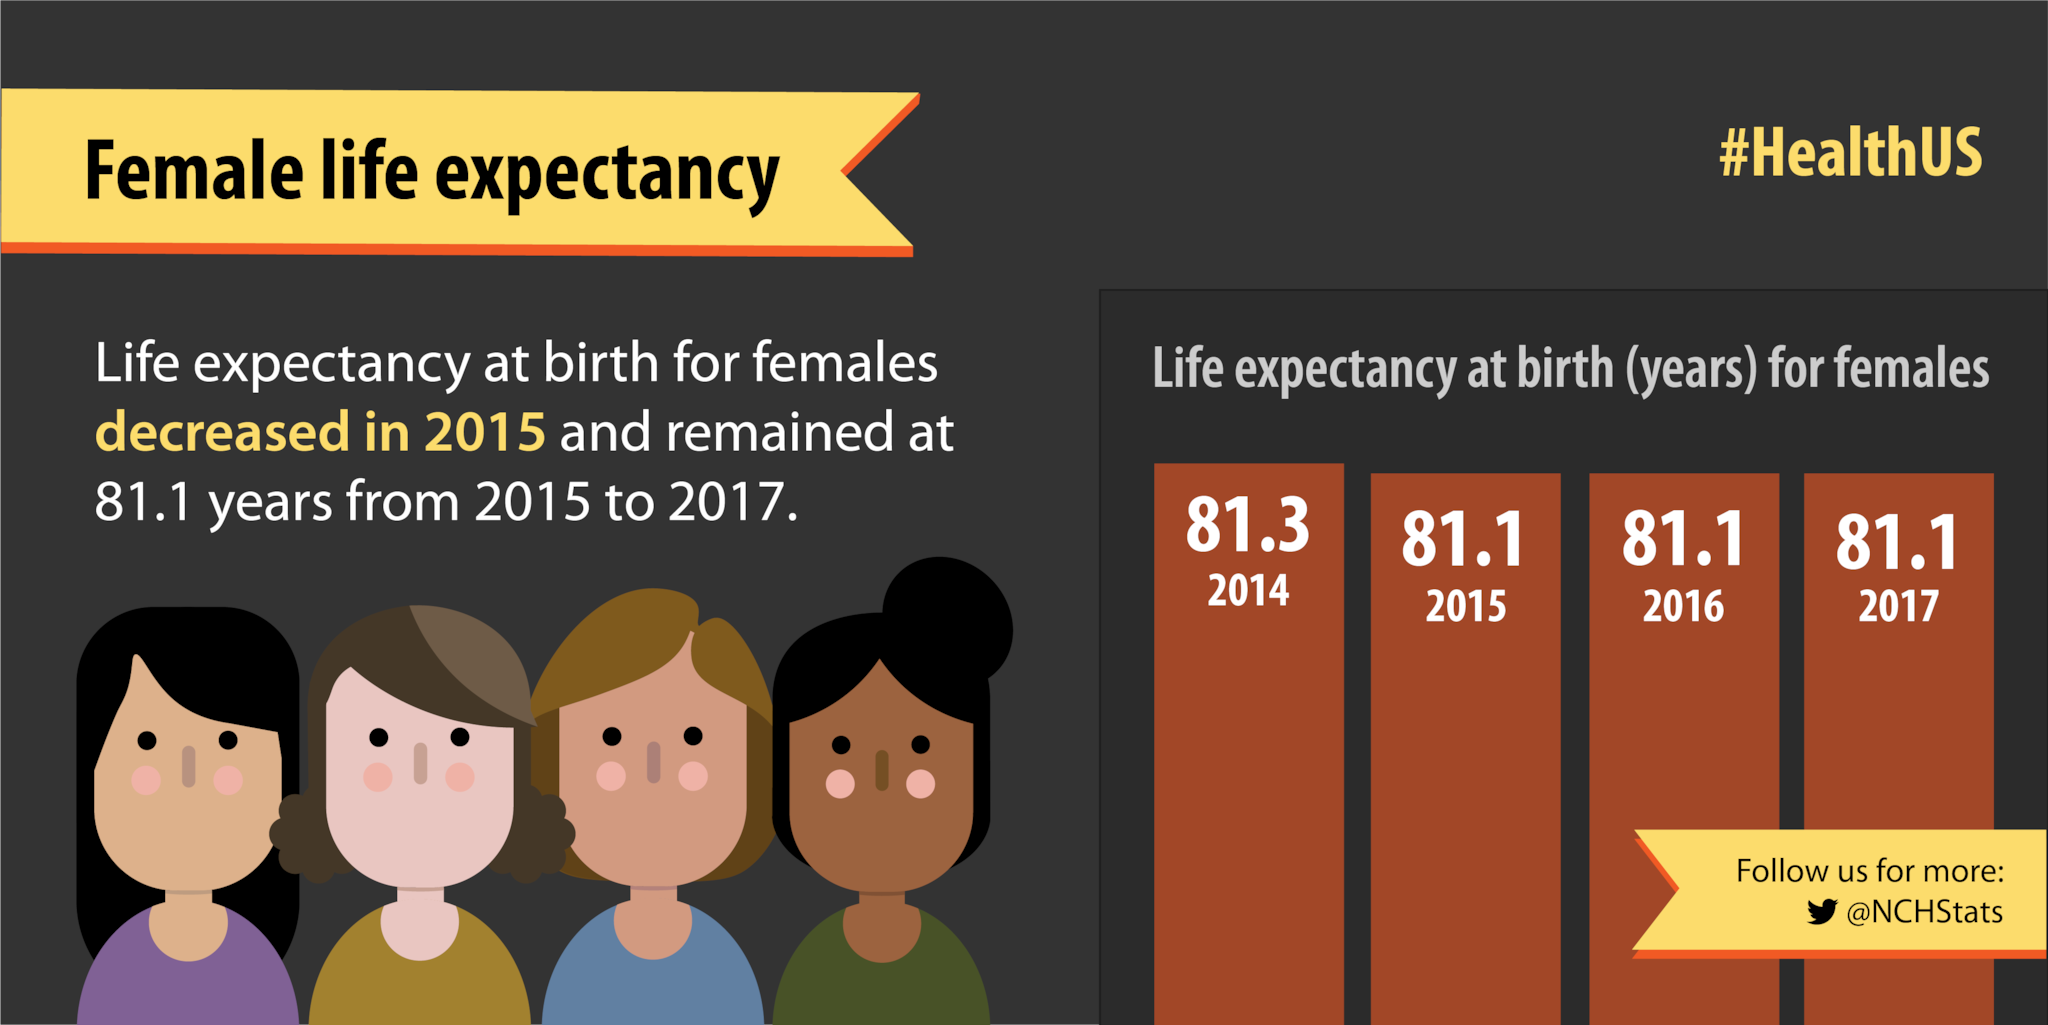 Life expectancy at birth for females decreased in 2015 and remained at 81.1 years from 2015 to 2017.